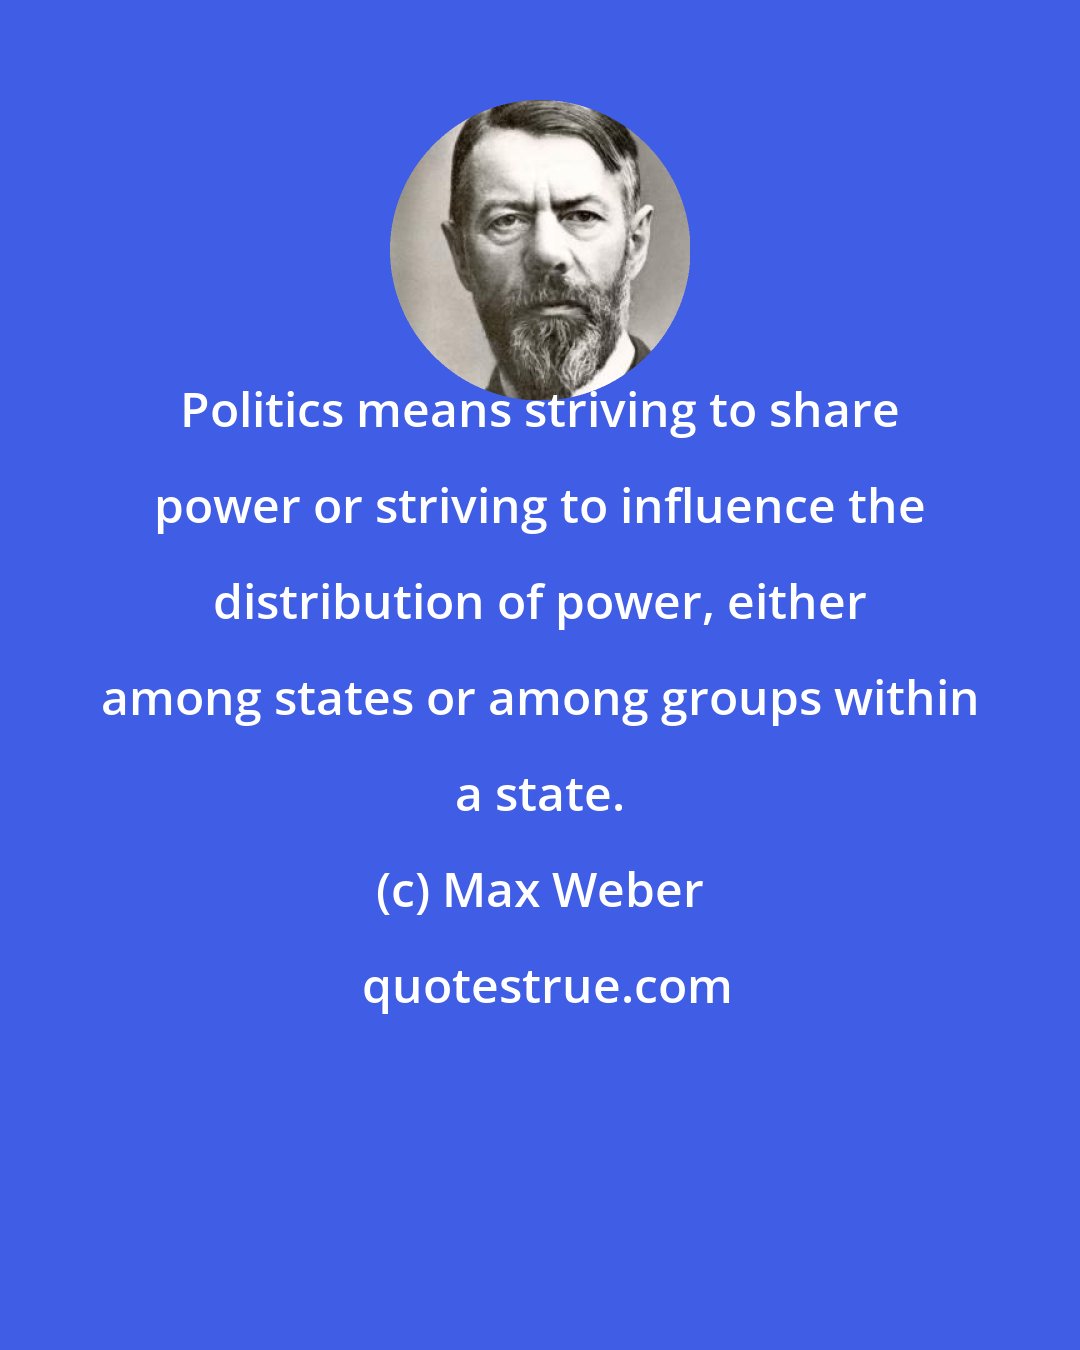 Max Weber: Politics means striving to share power or striving to influence the distribution of power, either among states or among groups within a state.